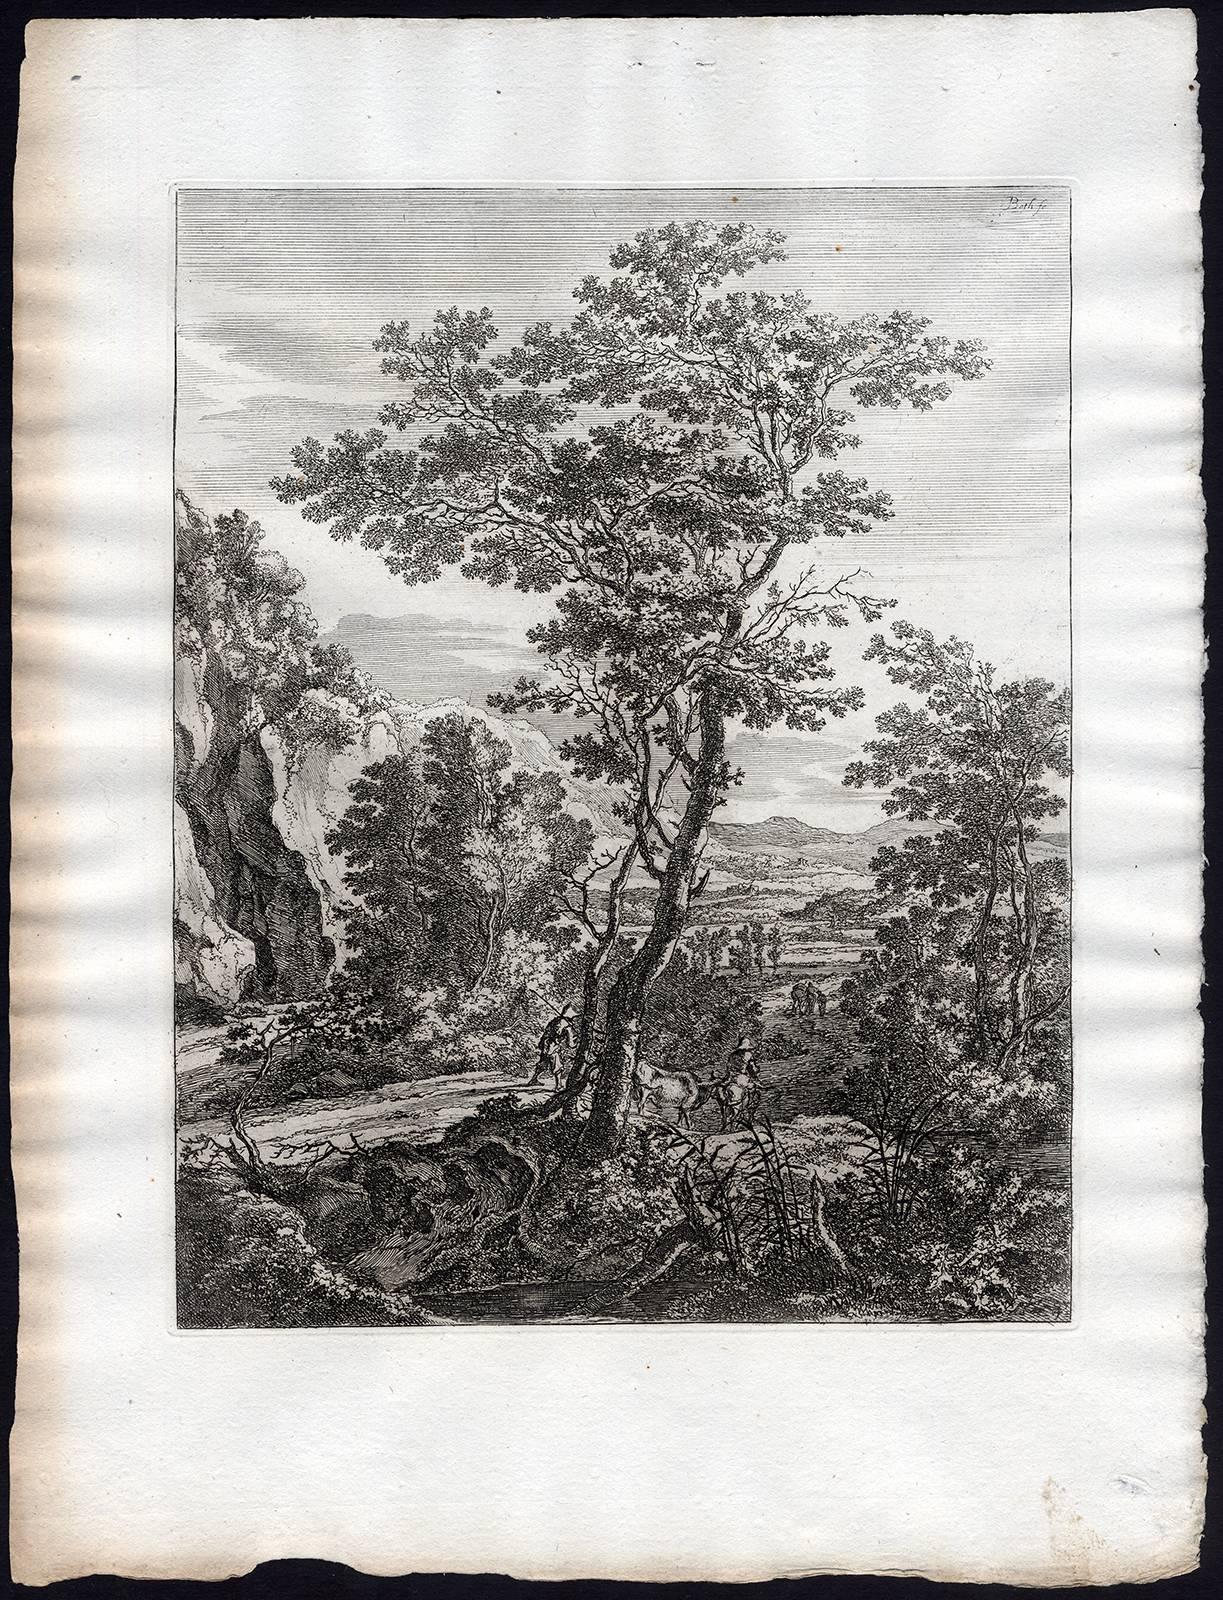 The complete set of four Italianate landscape engravings: 1) a large tree, 2) a woman on a mule, 3) two mules on a path, 4) resting travellers. Each of the landscapes is a mountainous area with several rural figures.
4 Etchings on hand laid paper,